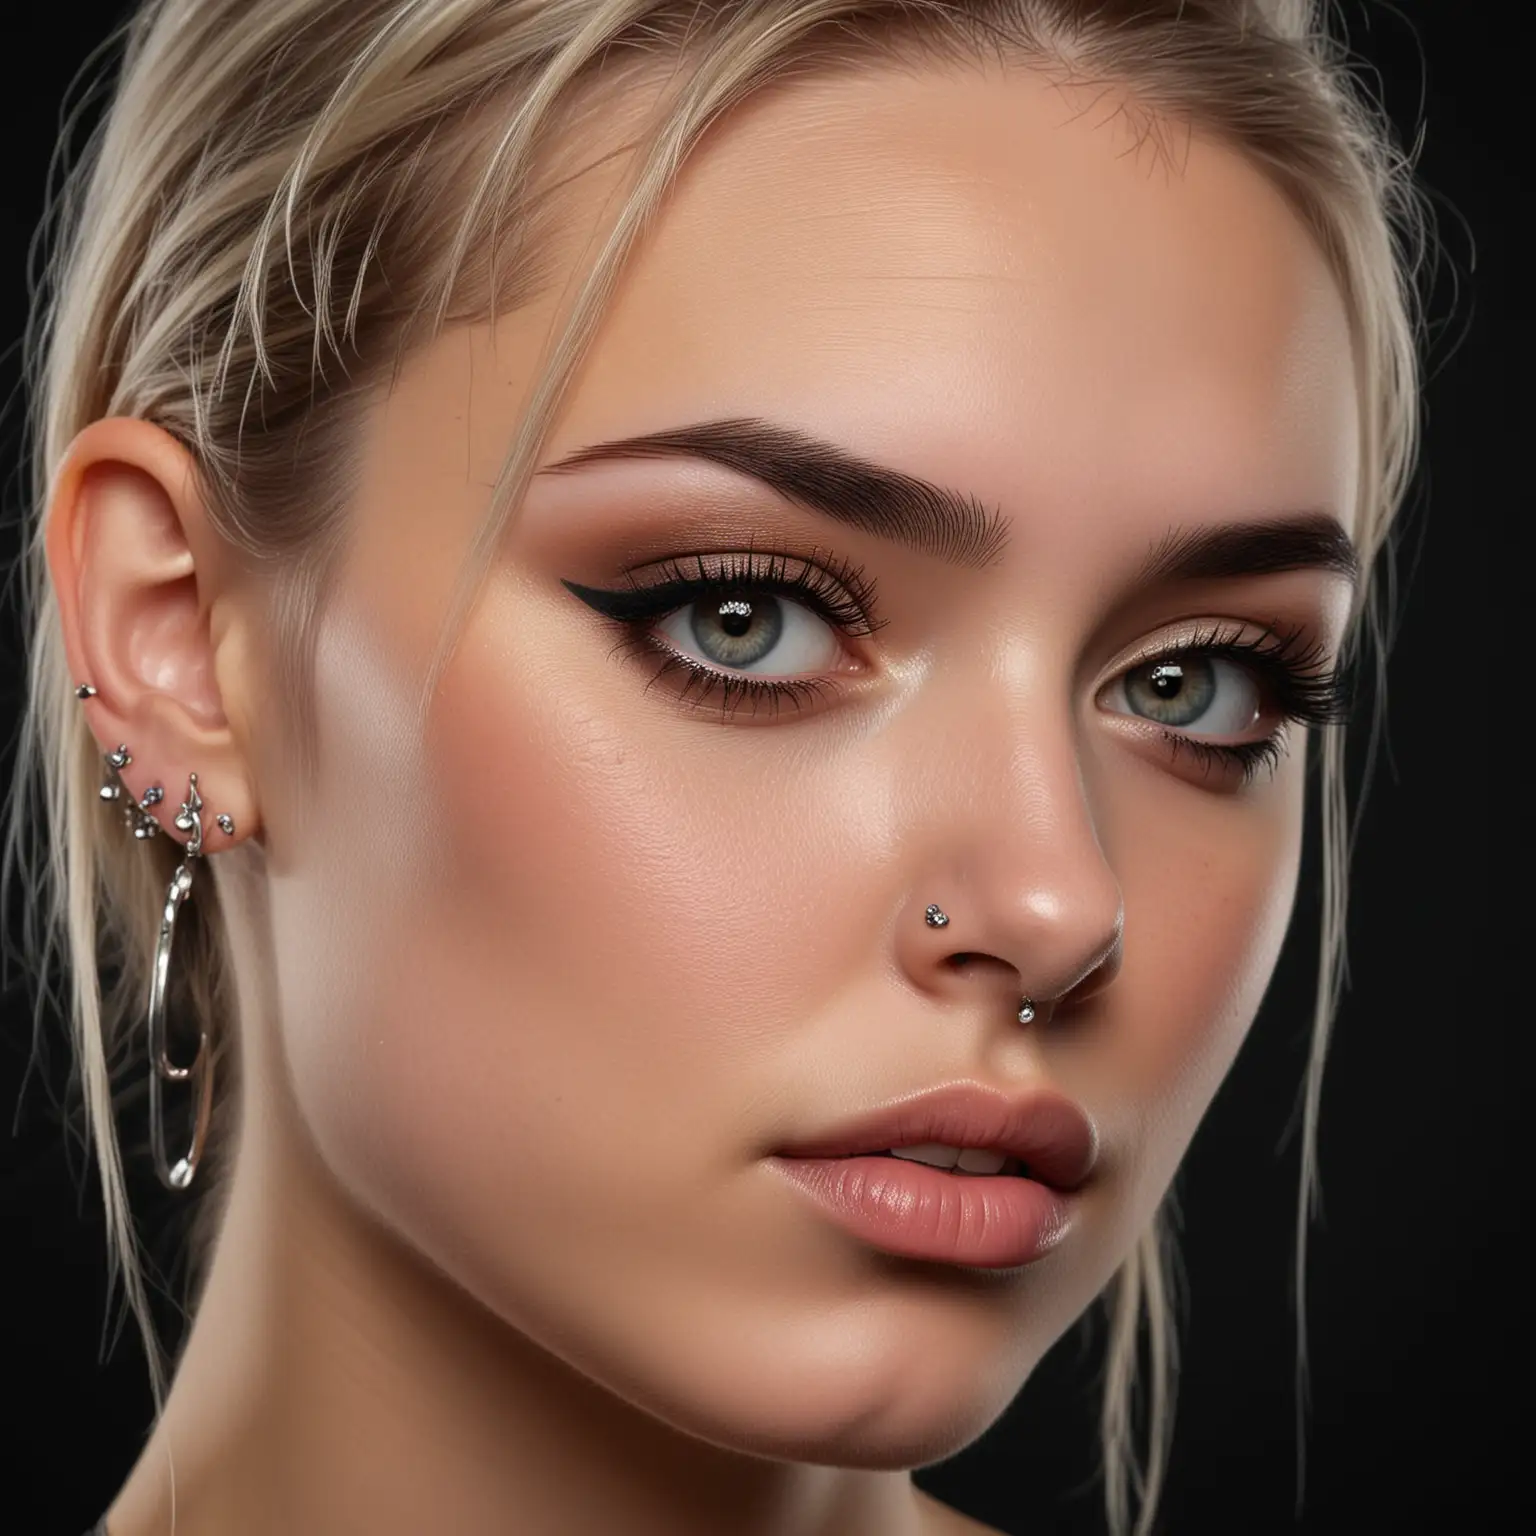 Stylized Portrait of a Beautiful Girl with Piercings on Ear and Eyebrow